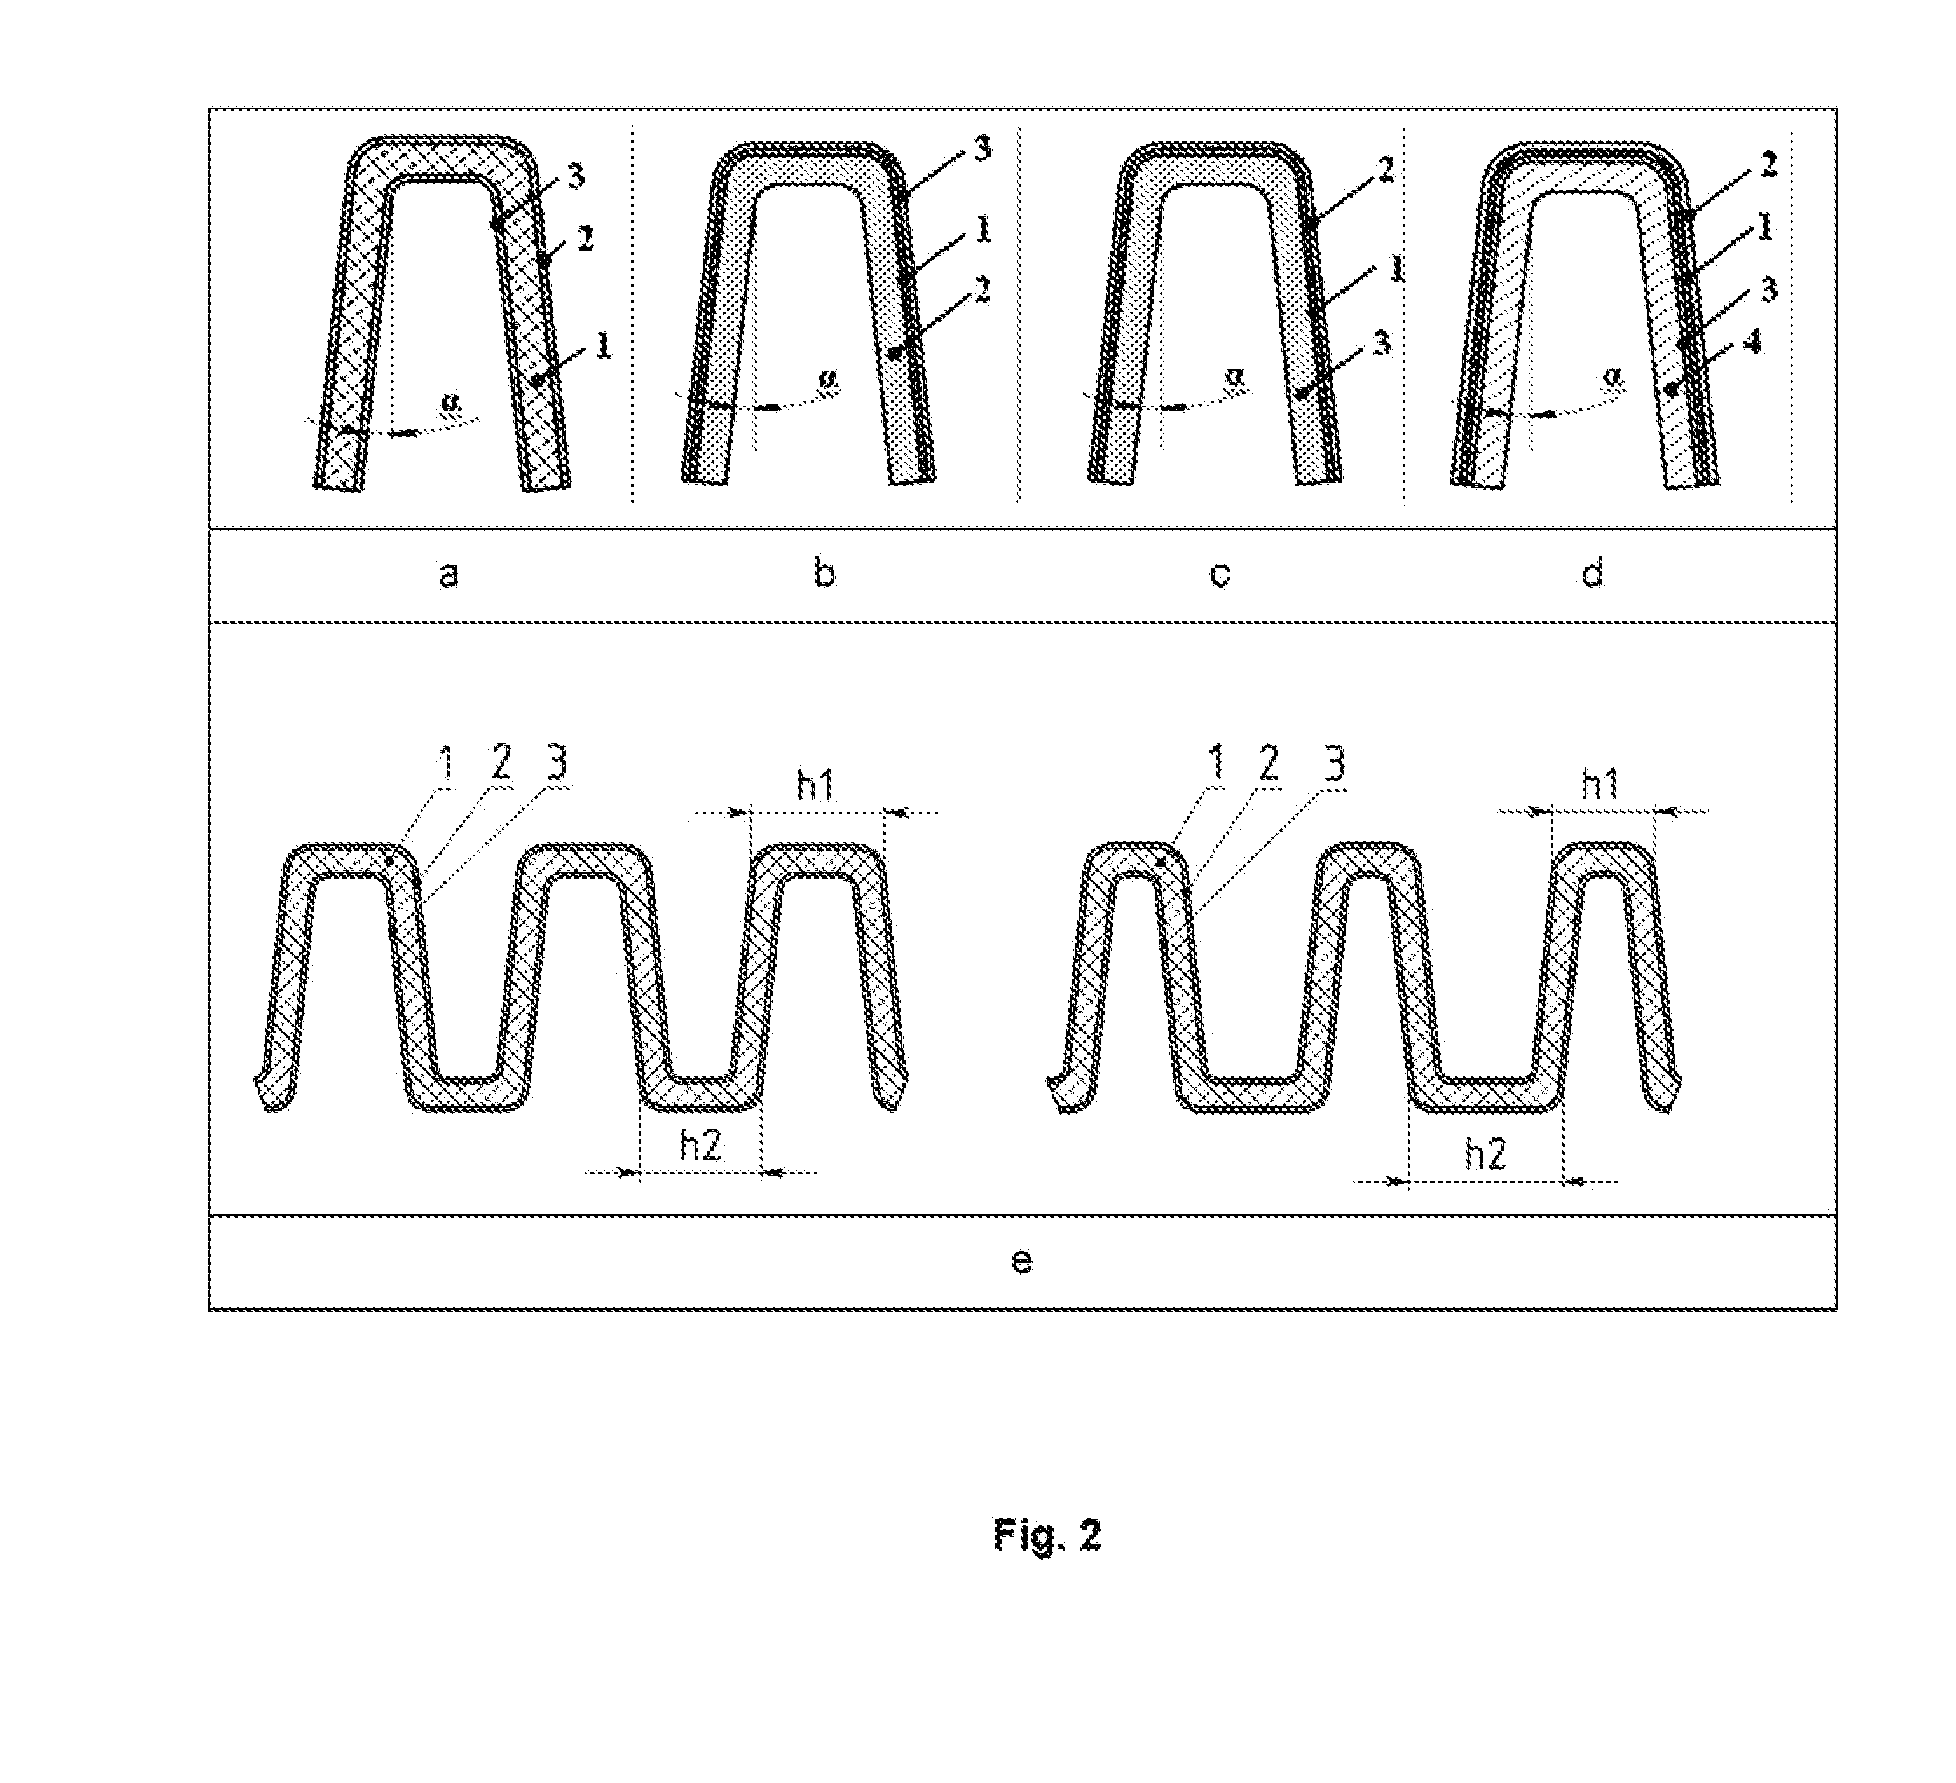 Modified planar cell (MPC) and electrochemical device battery (stack) based on MPC, manufacturing method for planar cell and battery, and planar cell embodiments